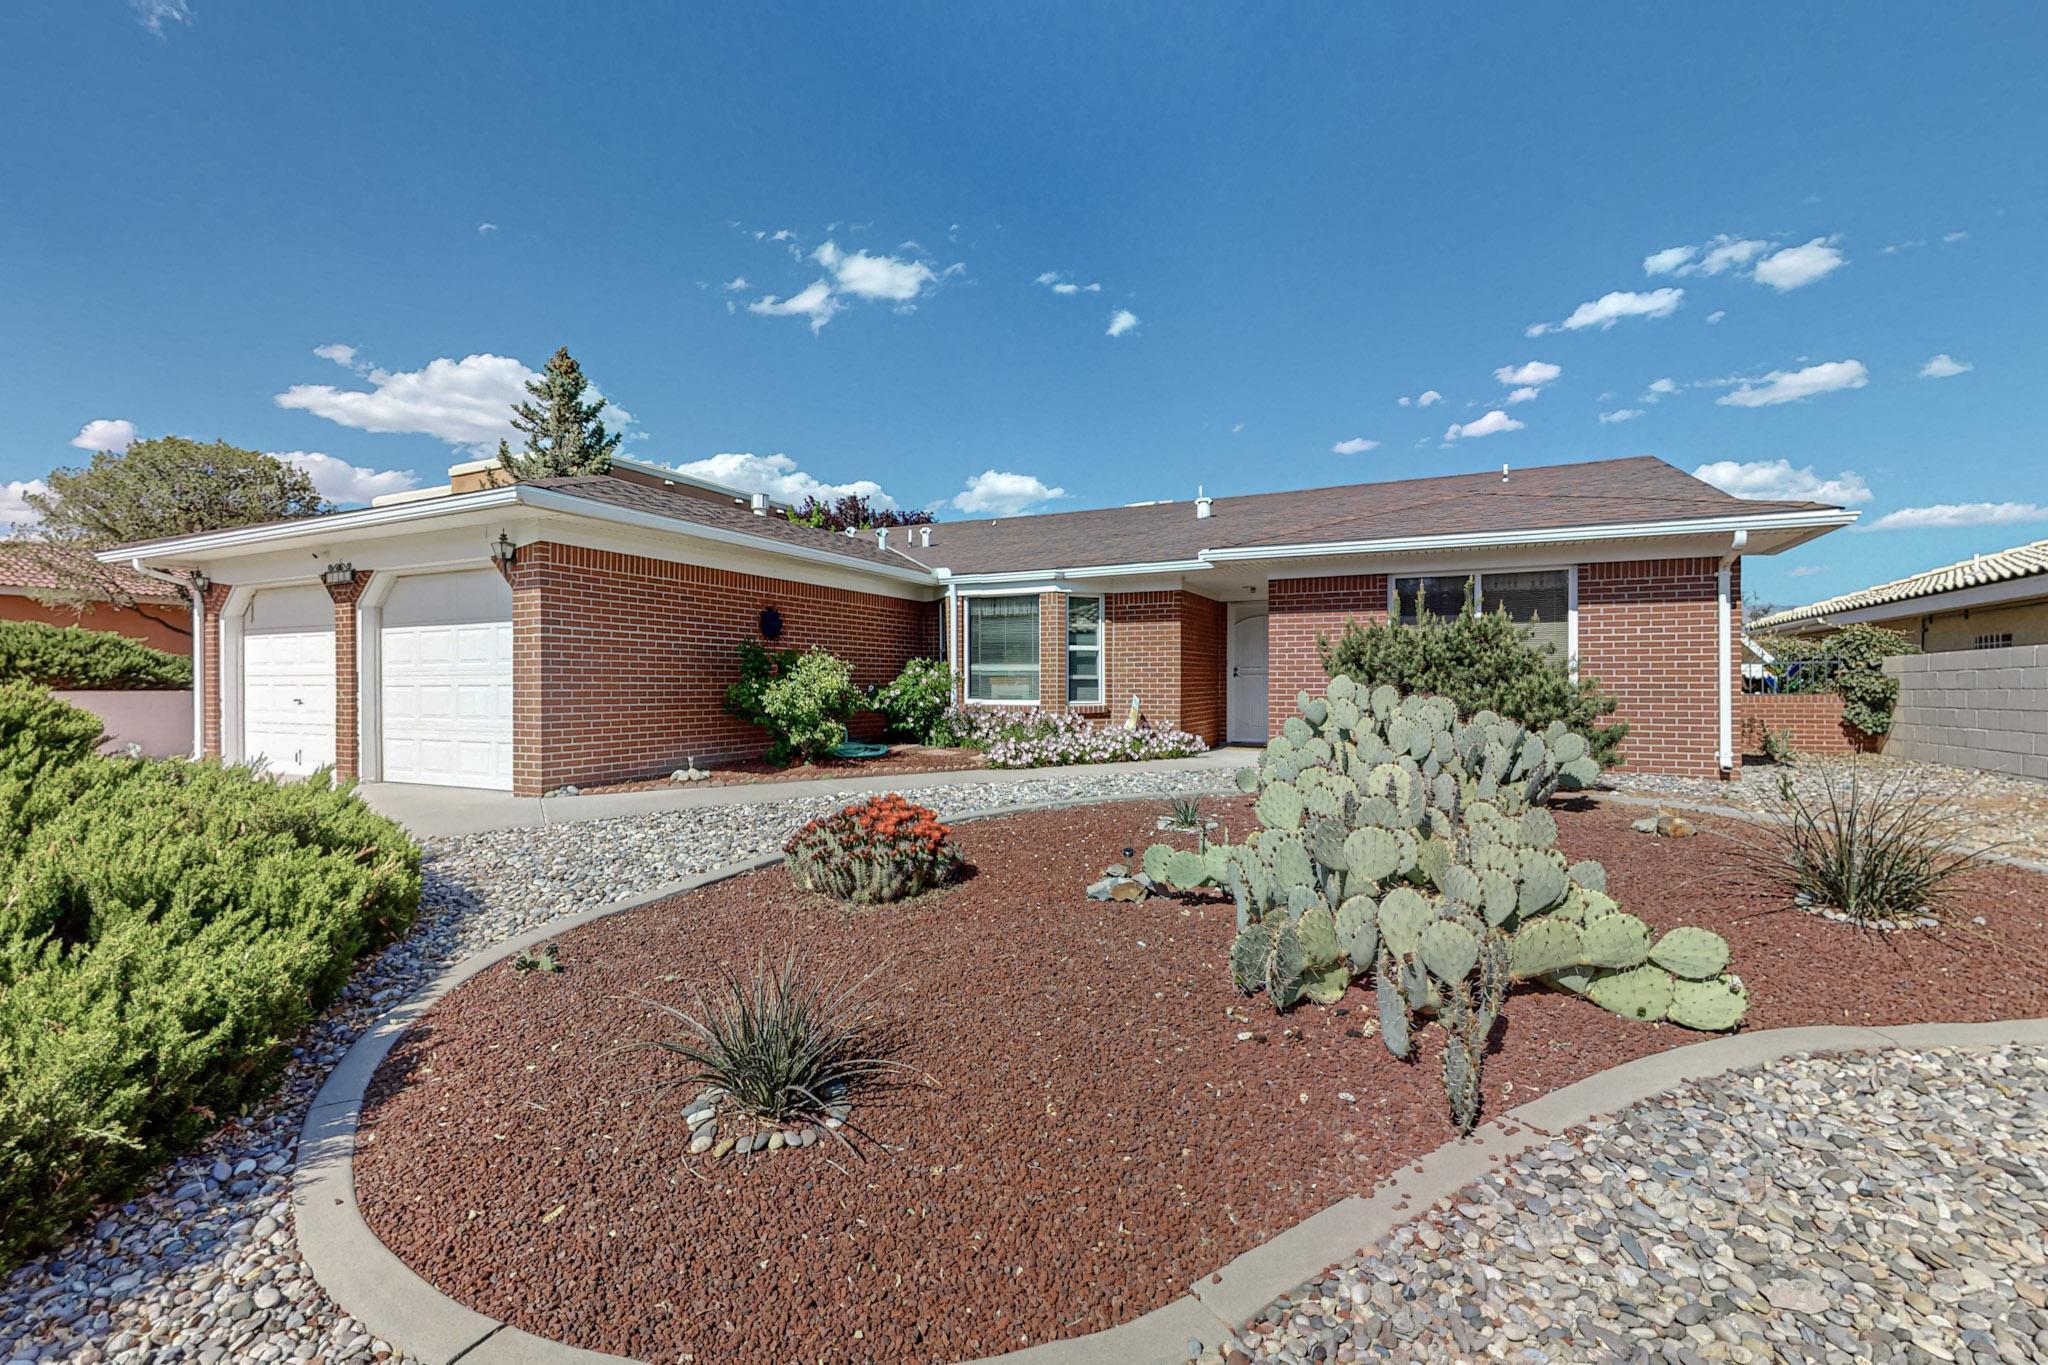 8116 Fairmont Drive NW, Albuquerque, New Mexico 87120, 3 Bedrooms Bedrooms, ,2 BathroomsBathrooms,Residential,For Sale,8116 Fairmont Drive NW,1061395